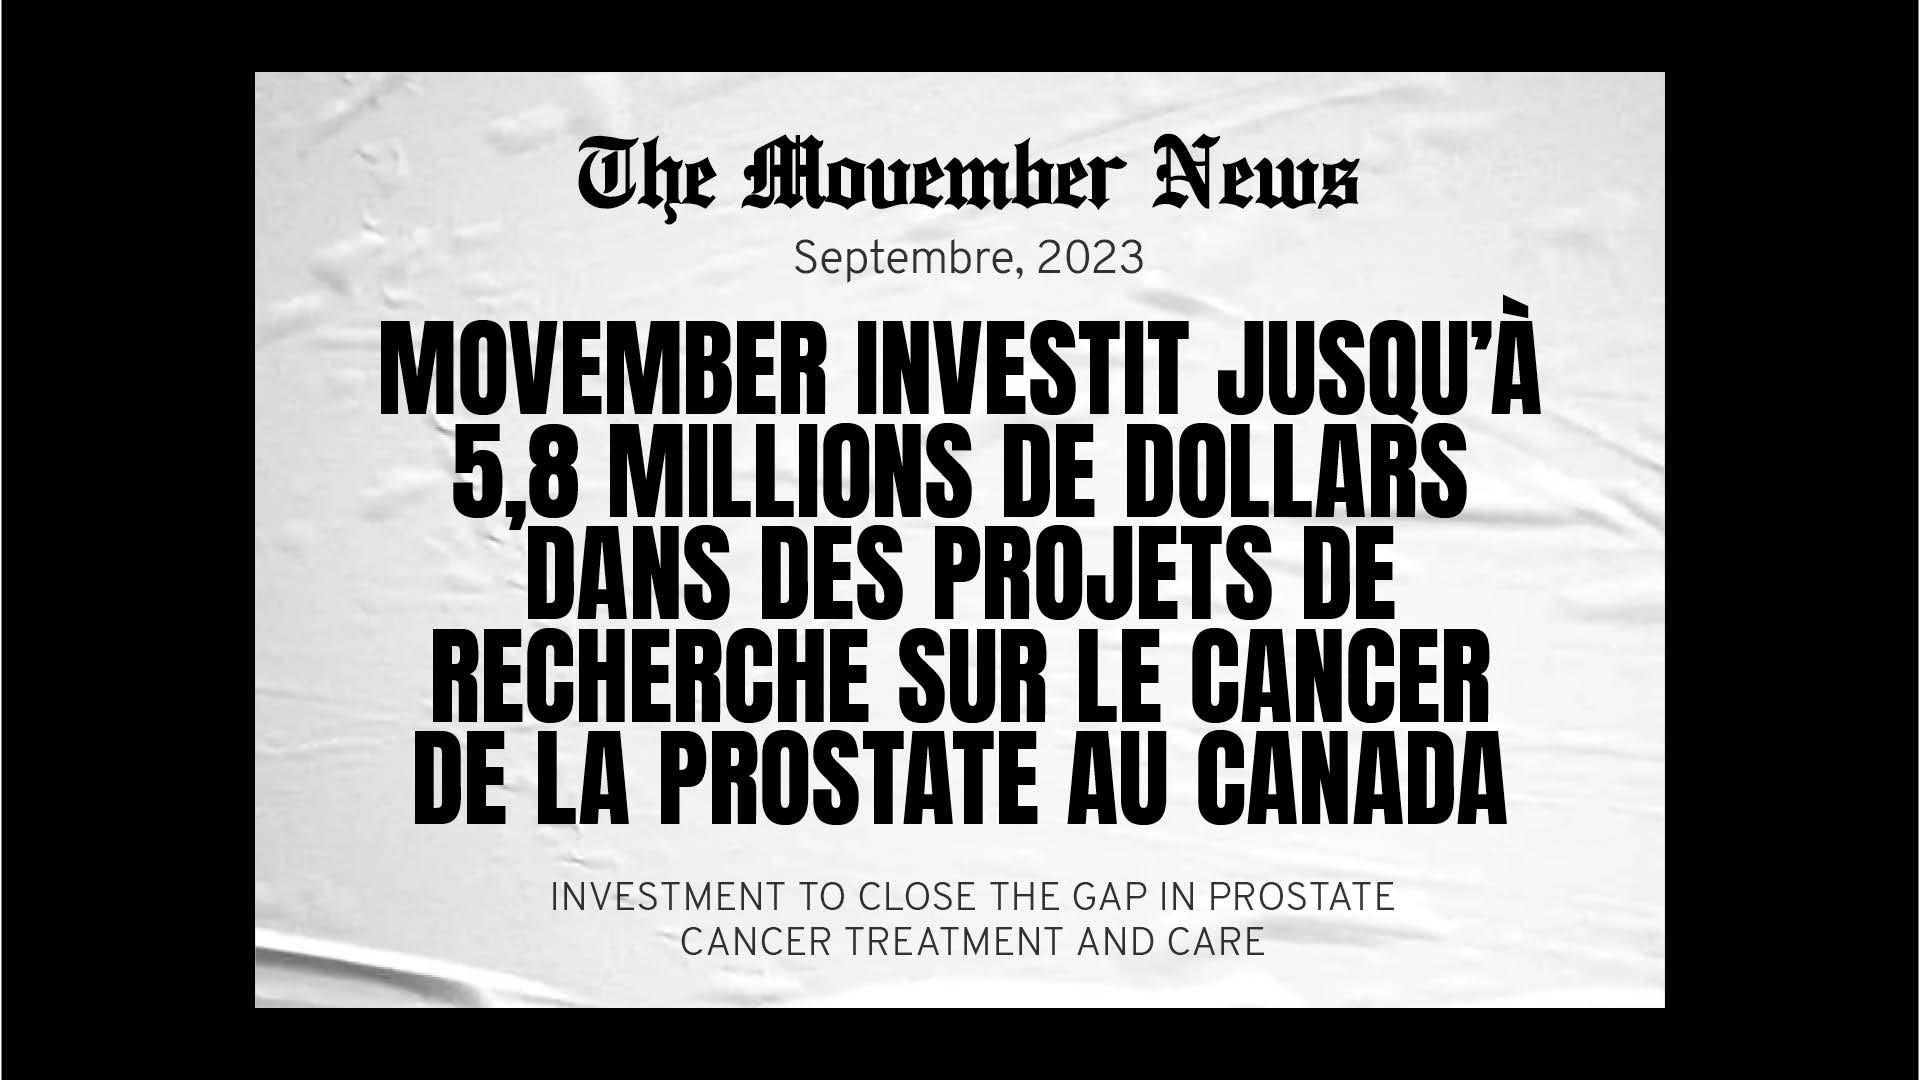 A newspaper-like heading reads: MOVEMBER TO INVEST UP TO $5.8 MILLION CAD INTO PROSTATE CANCER RESEARCH PROJECTS ACROSS CANADA"